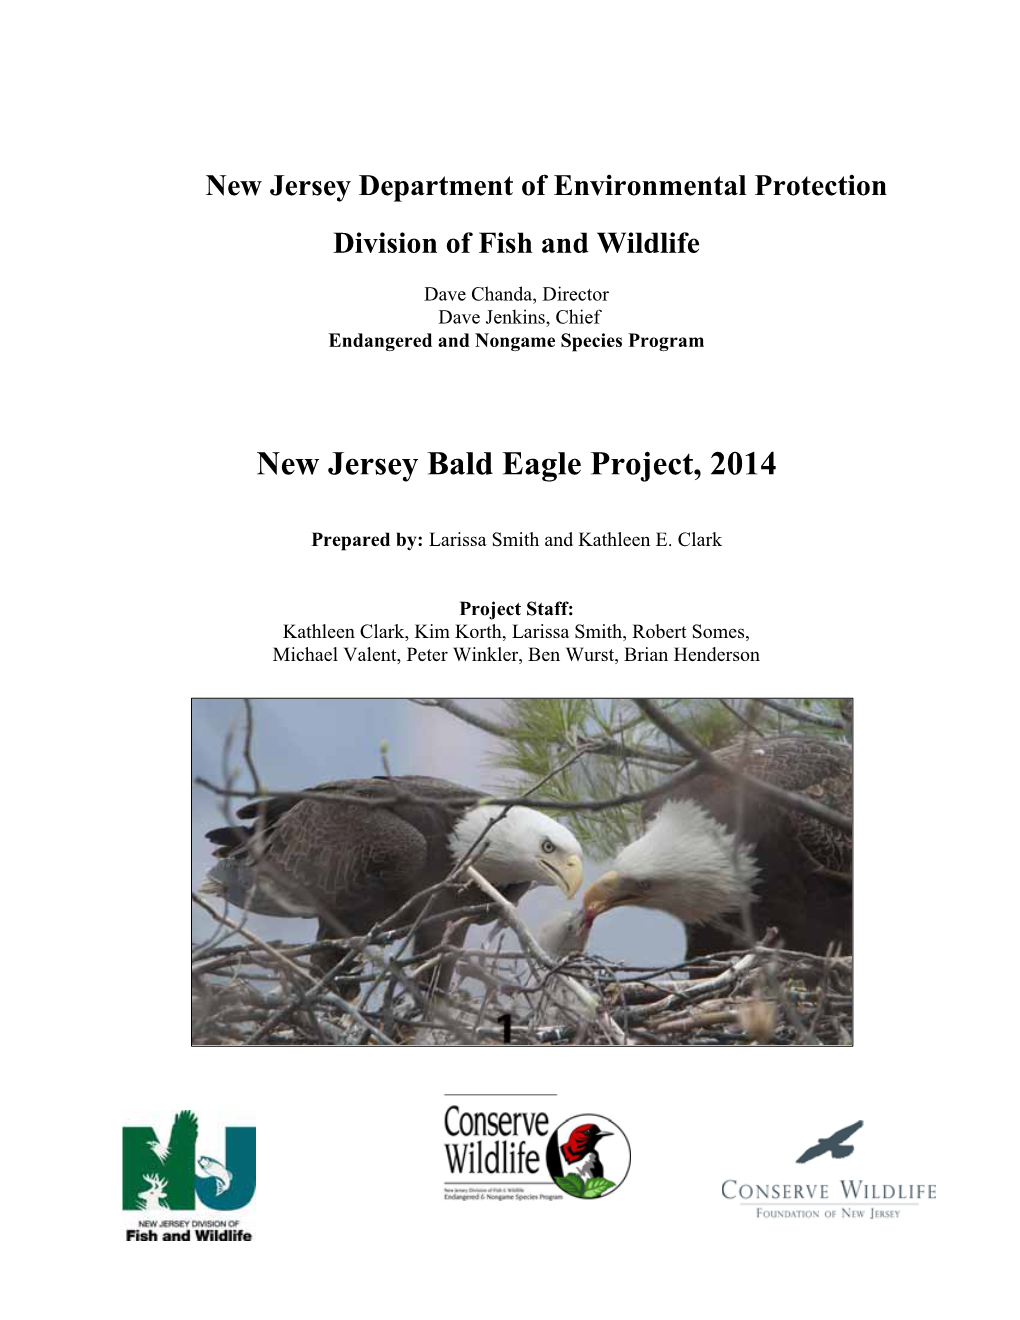 New Jersey Bald Eagle Project, 2014